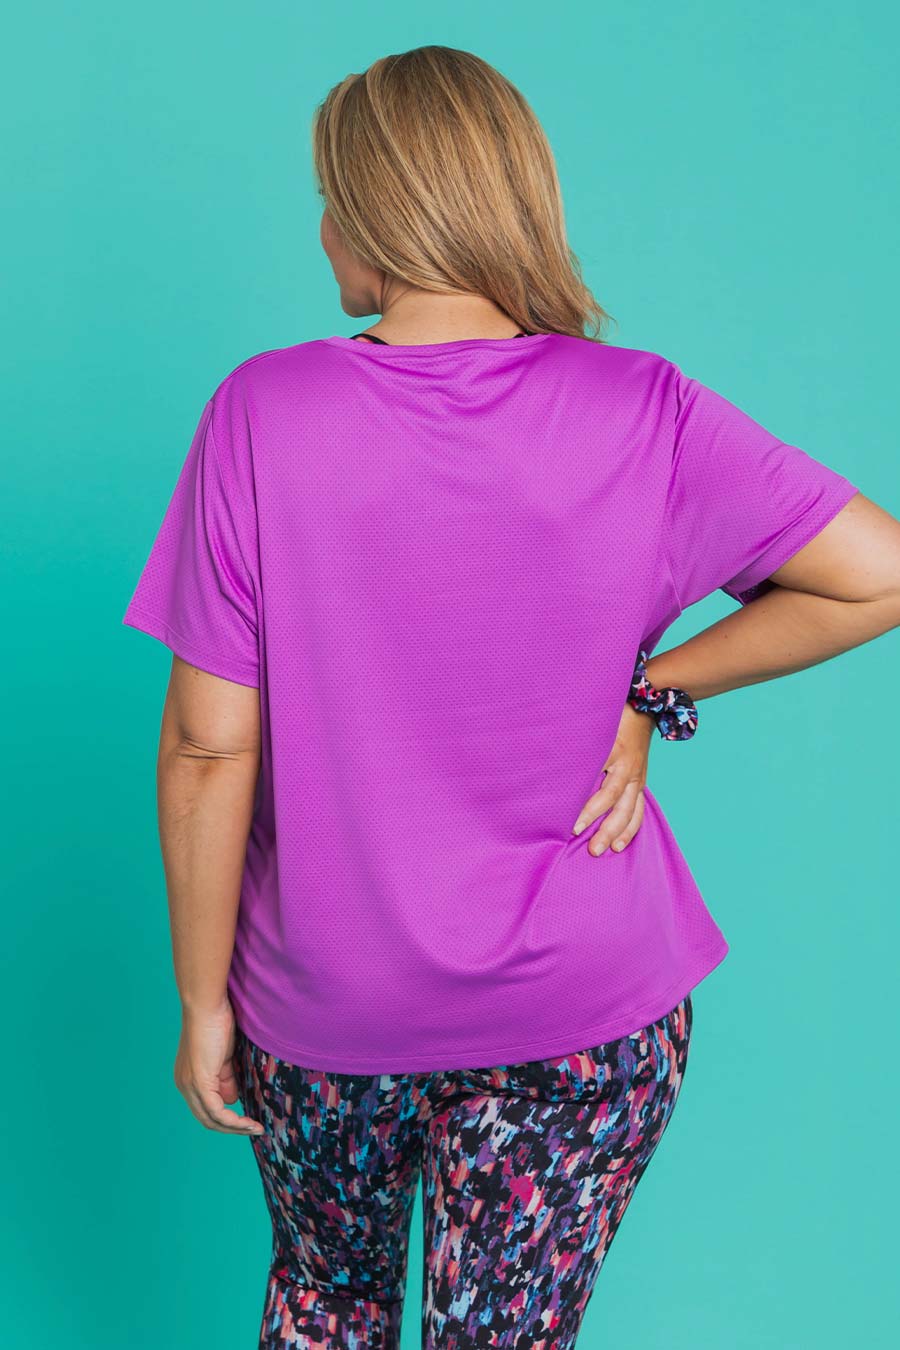 Pace Performance T-Shirt - Orchid from Active Truth™
